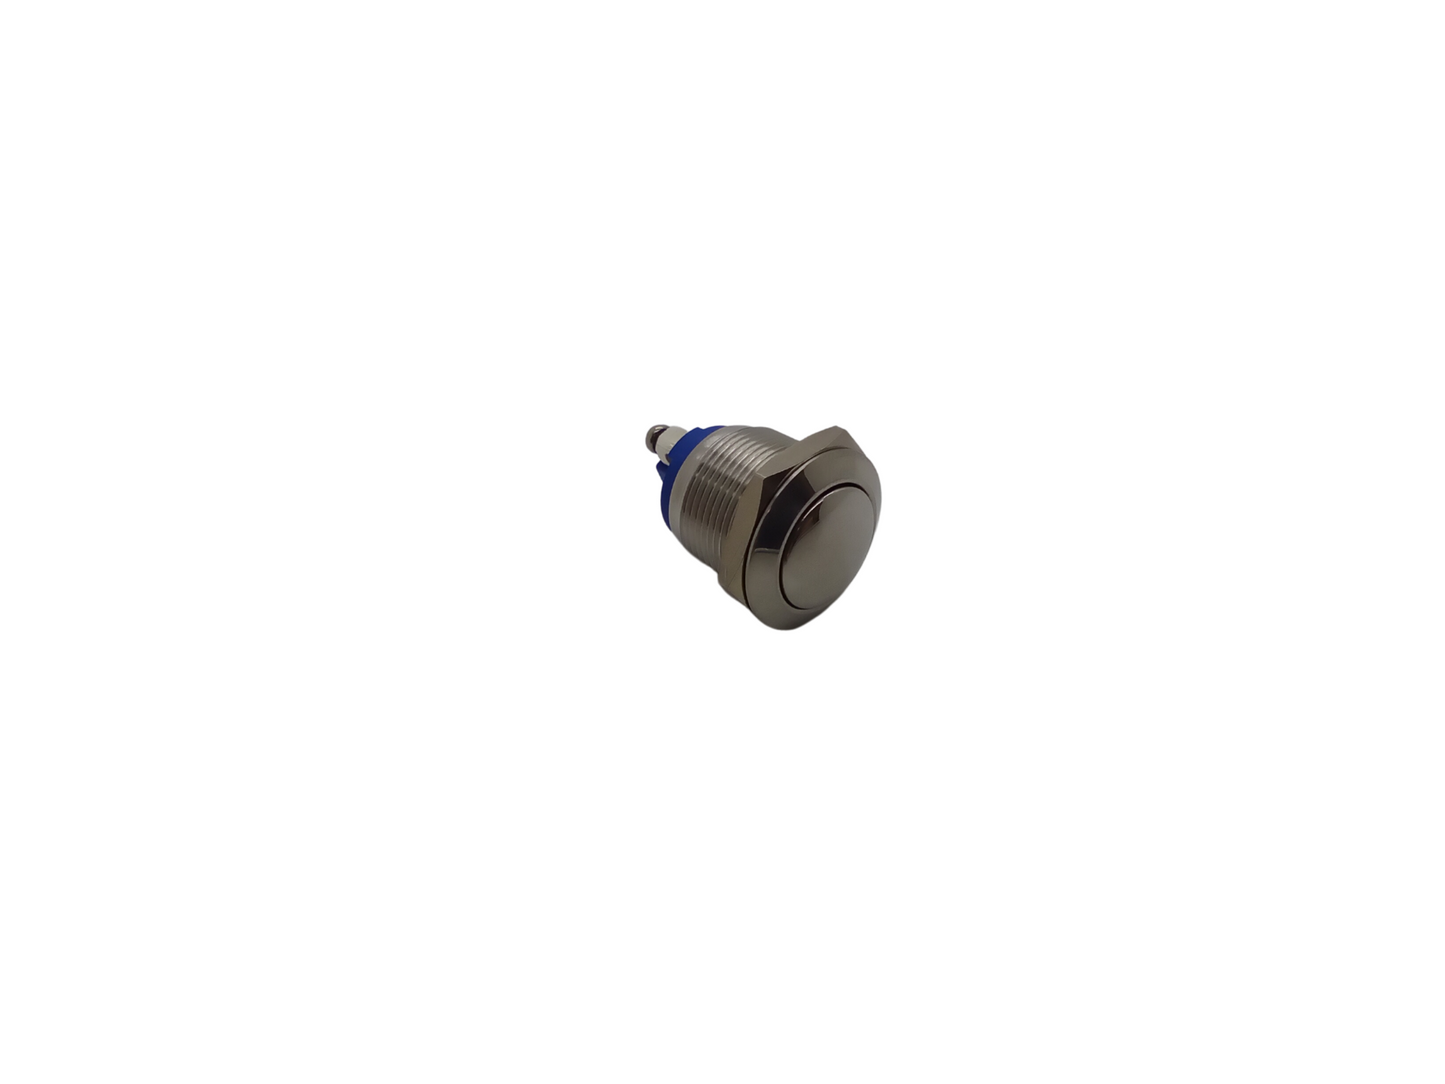 Vandal Resistant Momentary Switch Domed Push - Stainless Steel